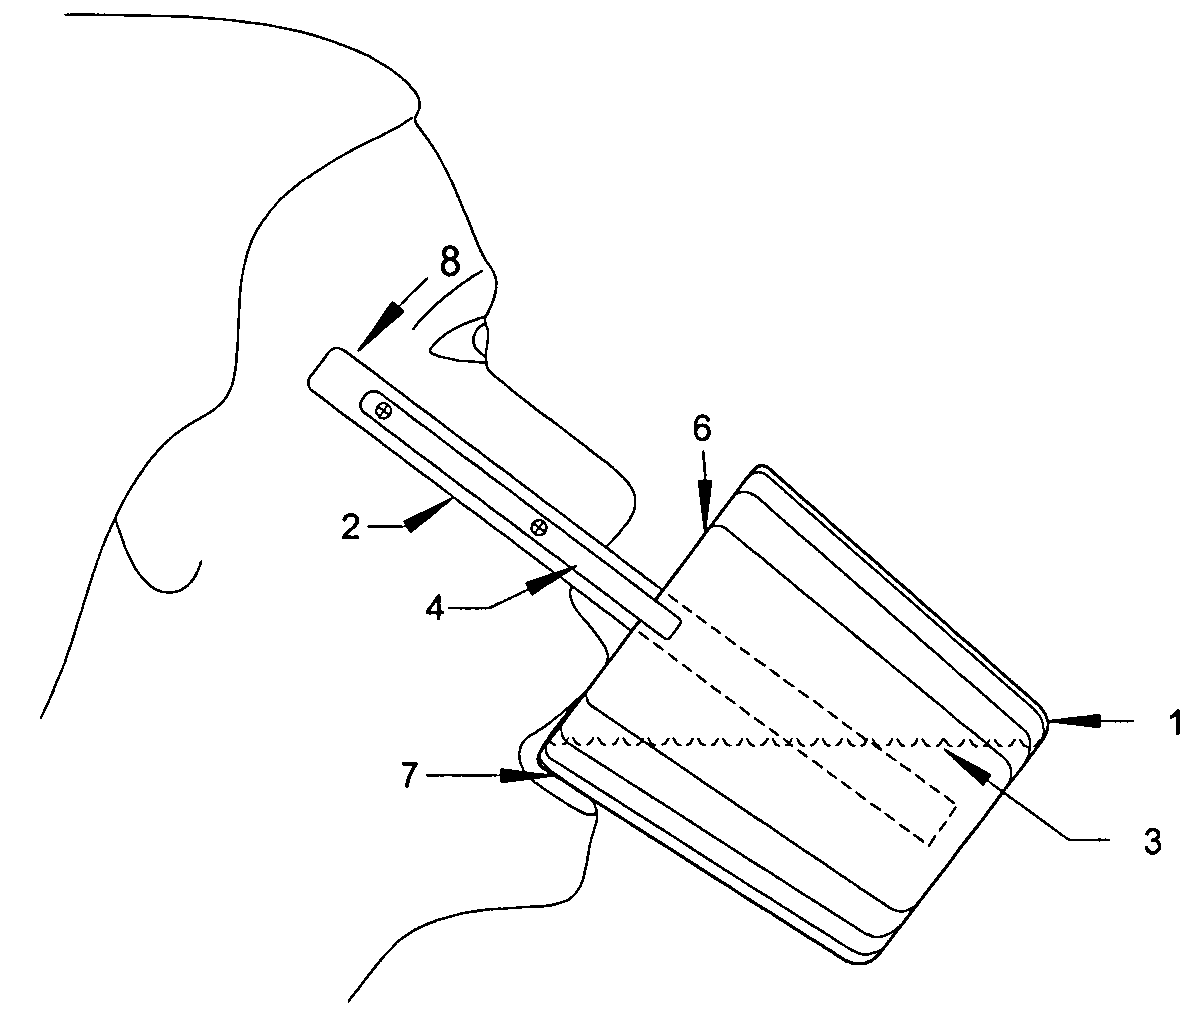 Device for the treatment of hiccups